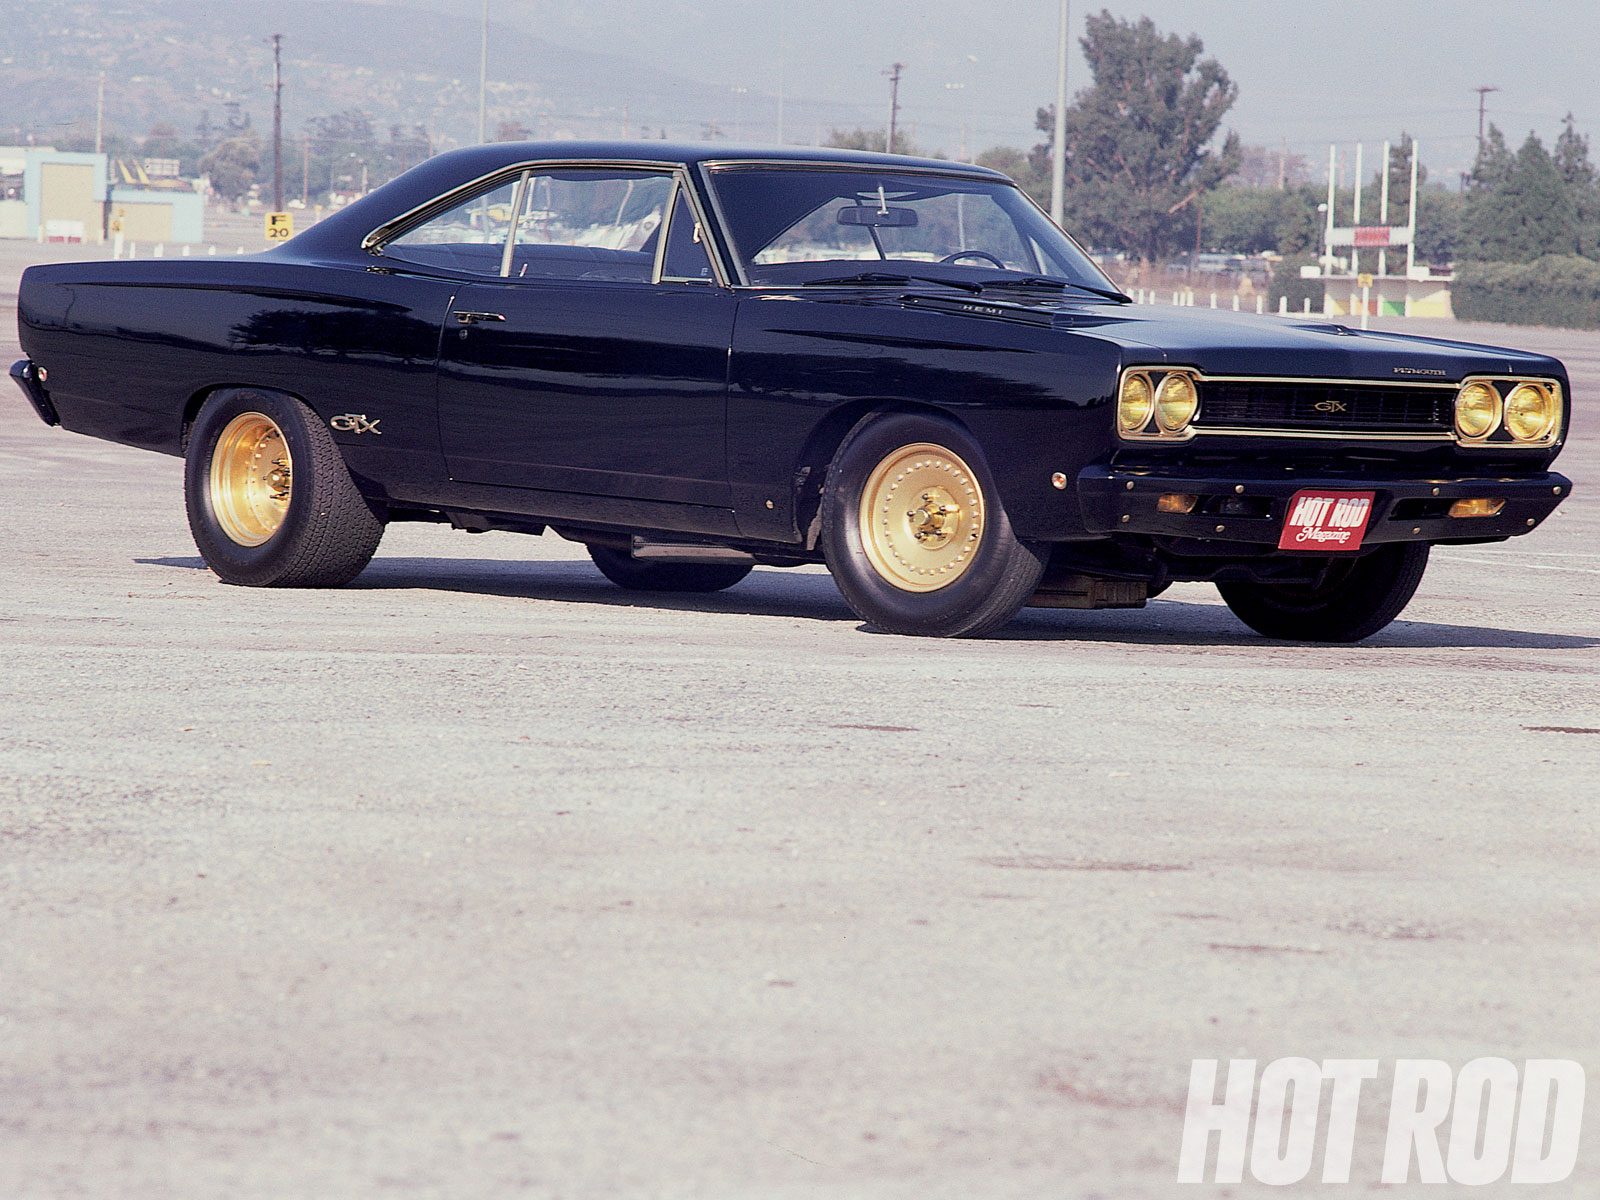 hrdp_0912_09%2B70s_and_80s_musclecars.jpg